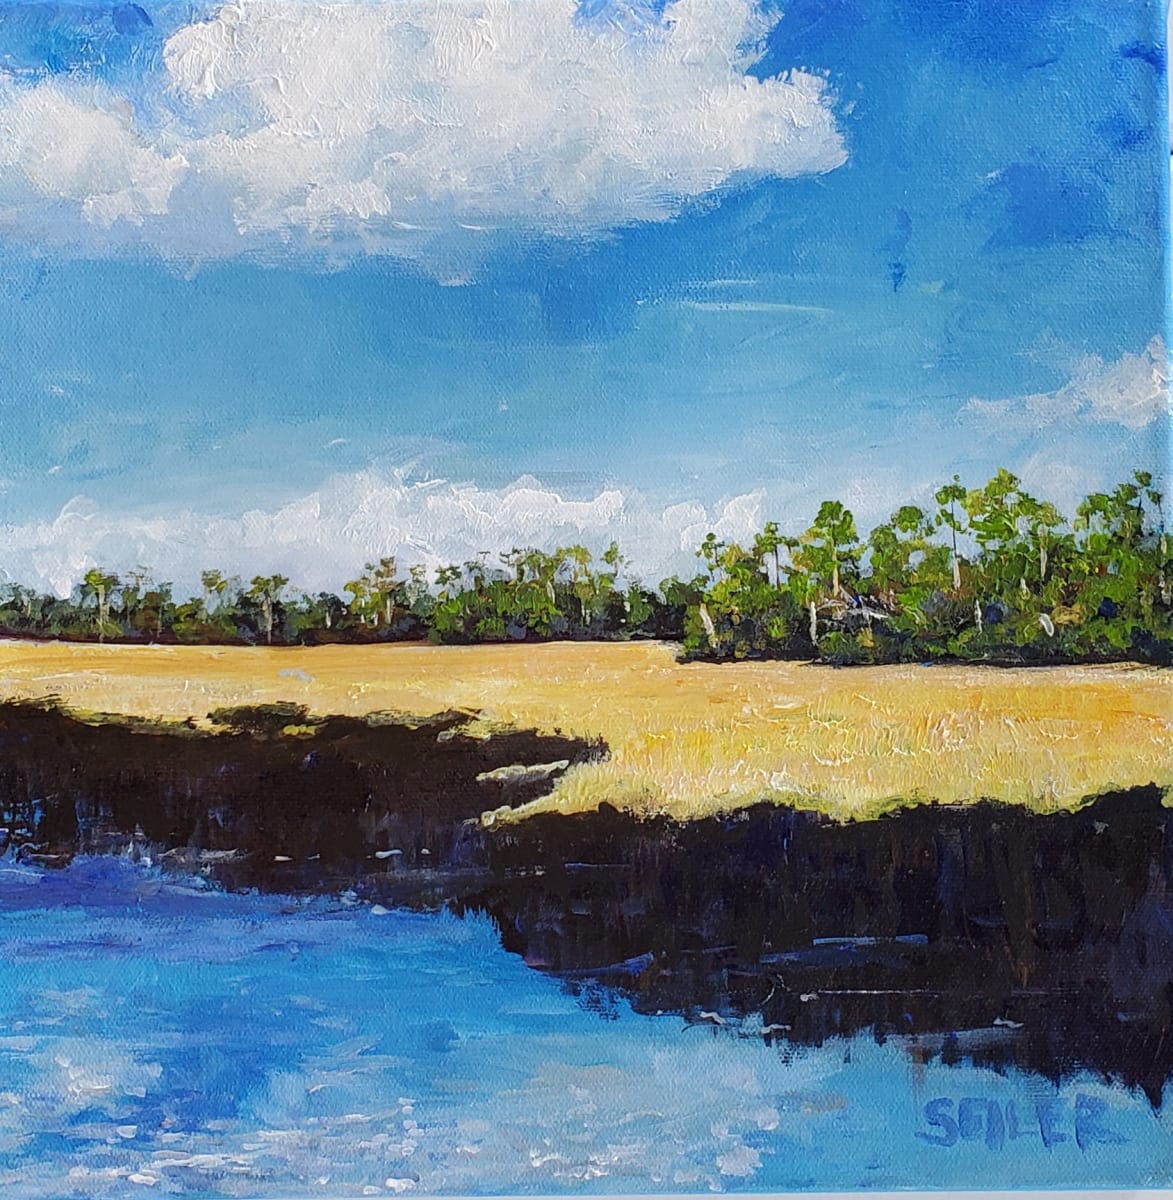 Salt Marsh Mystery by Jill Seiler  Image: I love the wetlands.  Can you imagine the secrets this place keeps. 